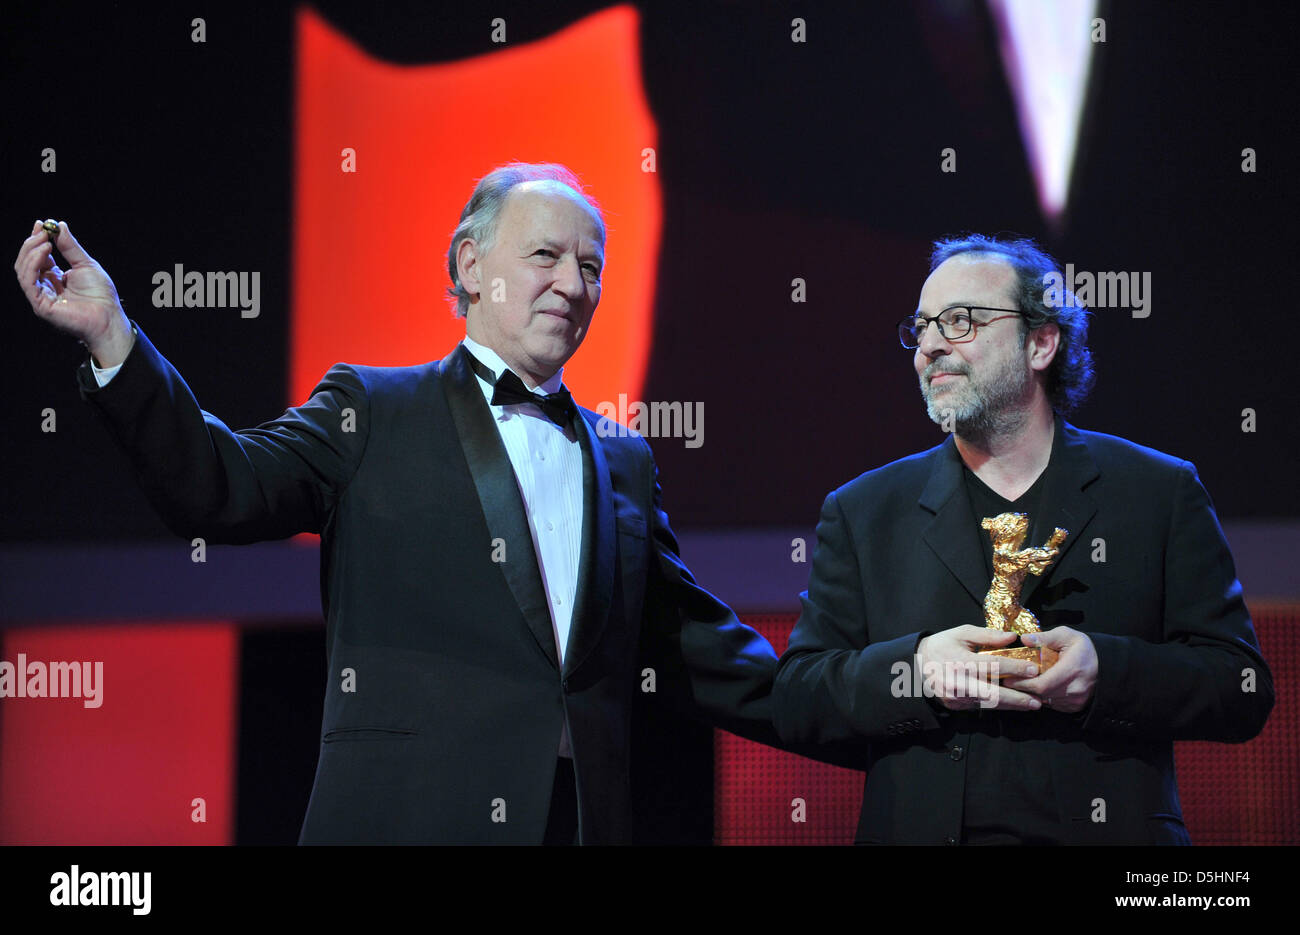 Director Semih Kaplanoglu (R) holds the Golden Bear for the Best Film for the movie 'Honey' next to jury president Werner Herzog during the award ceremony of the 60th Berlinale International Film Festival in Berlin, Germany, Saturday, 20 February 2010. Up to 400 films are shown every year as part of the Berlinale's public programme. The Berlinale is divided into different sections, Stock Photo